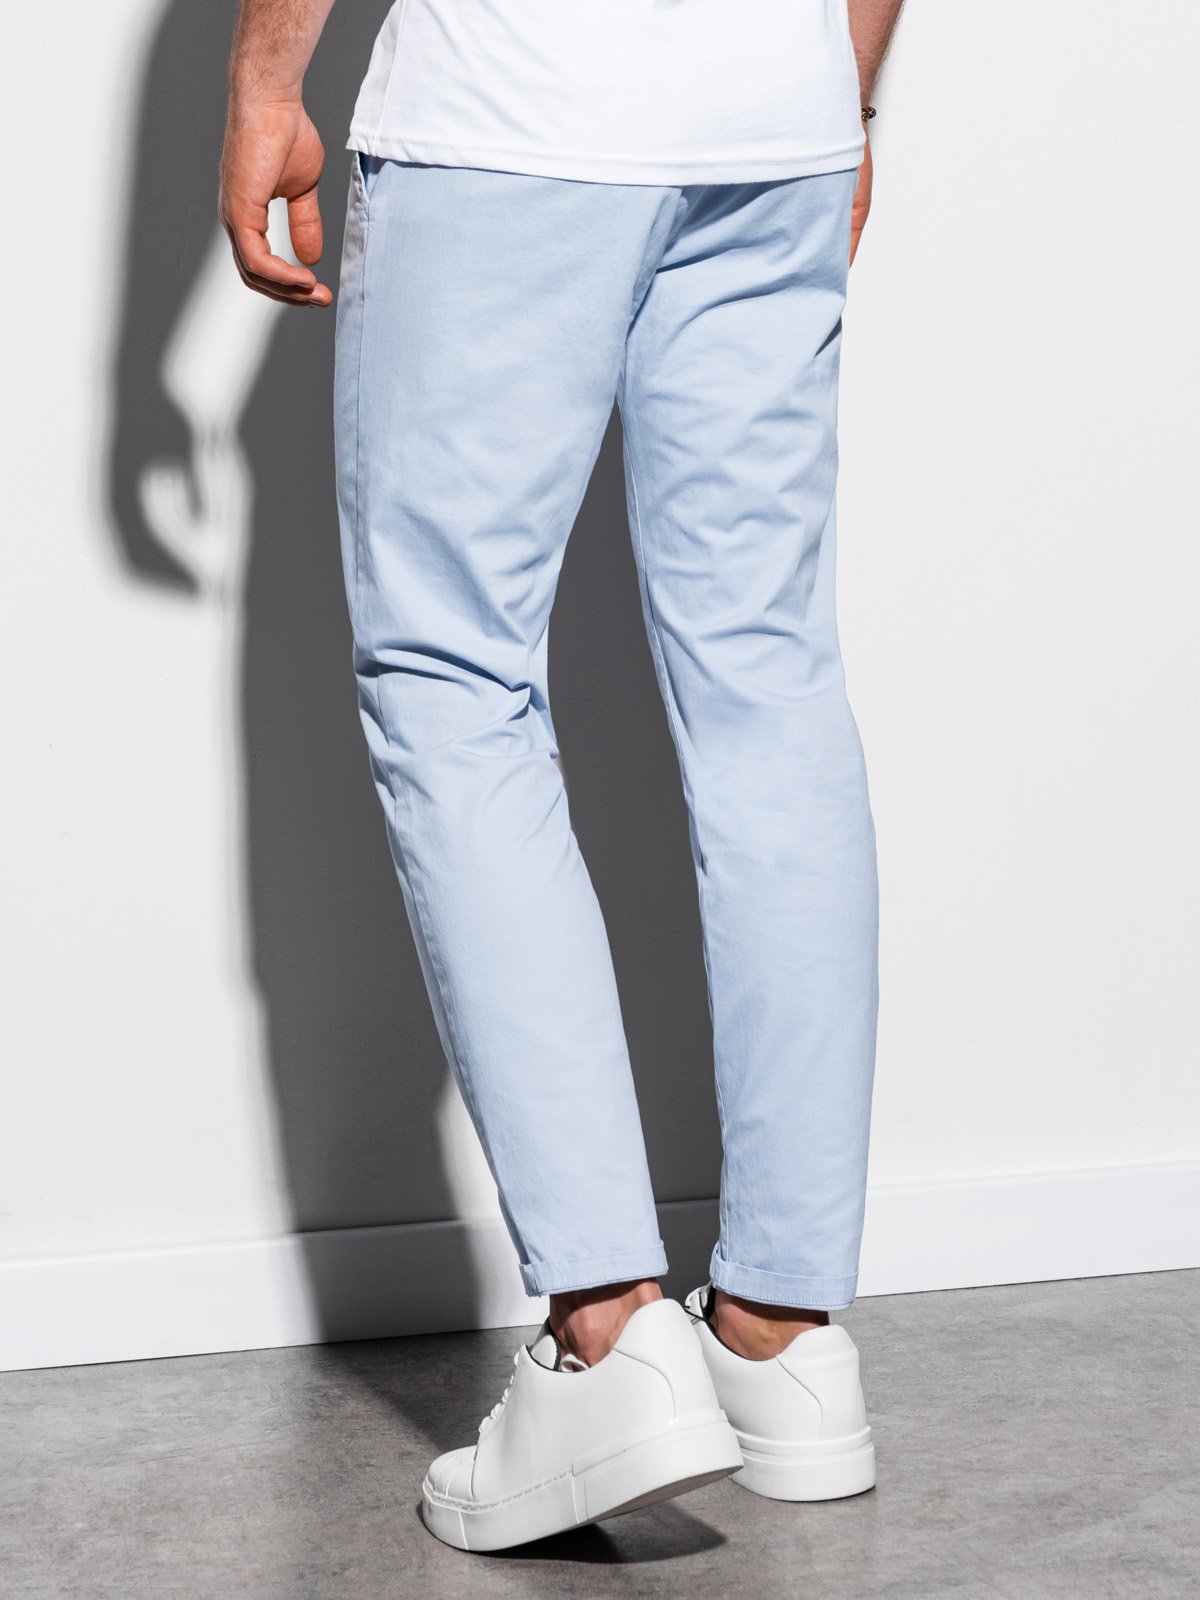 pale blue chinos,Save up to 18%,www.ilcascinone.com